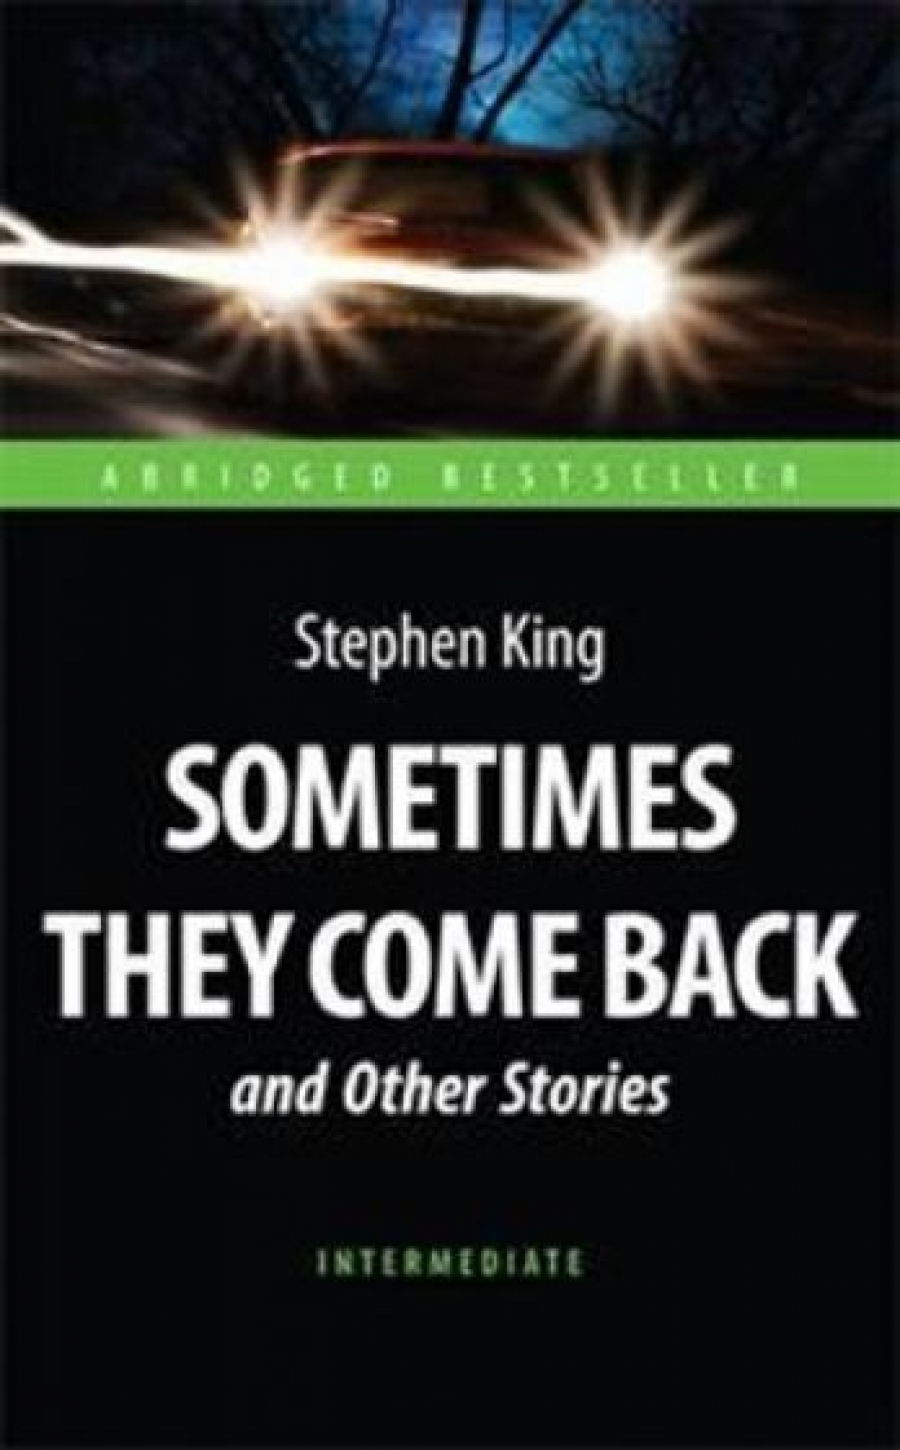   (King Stephen) Sometimes They Come Back and Other Stories: Intermediate 